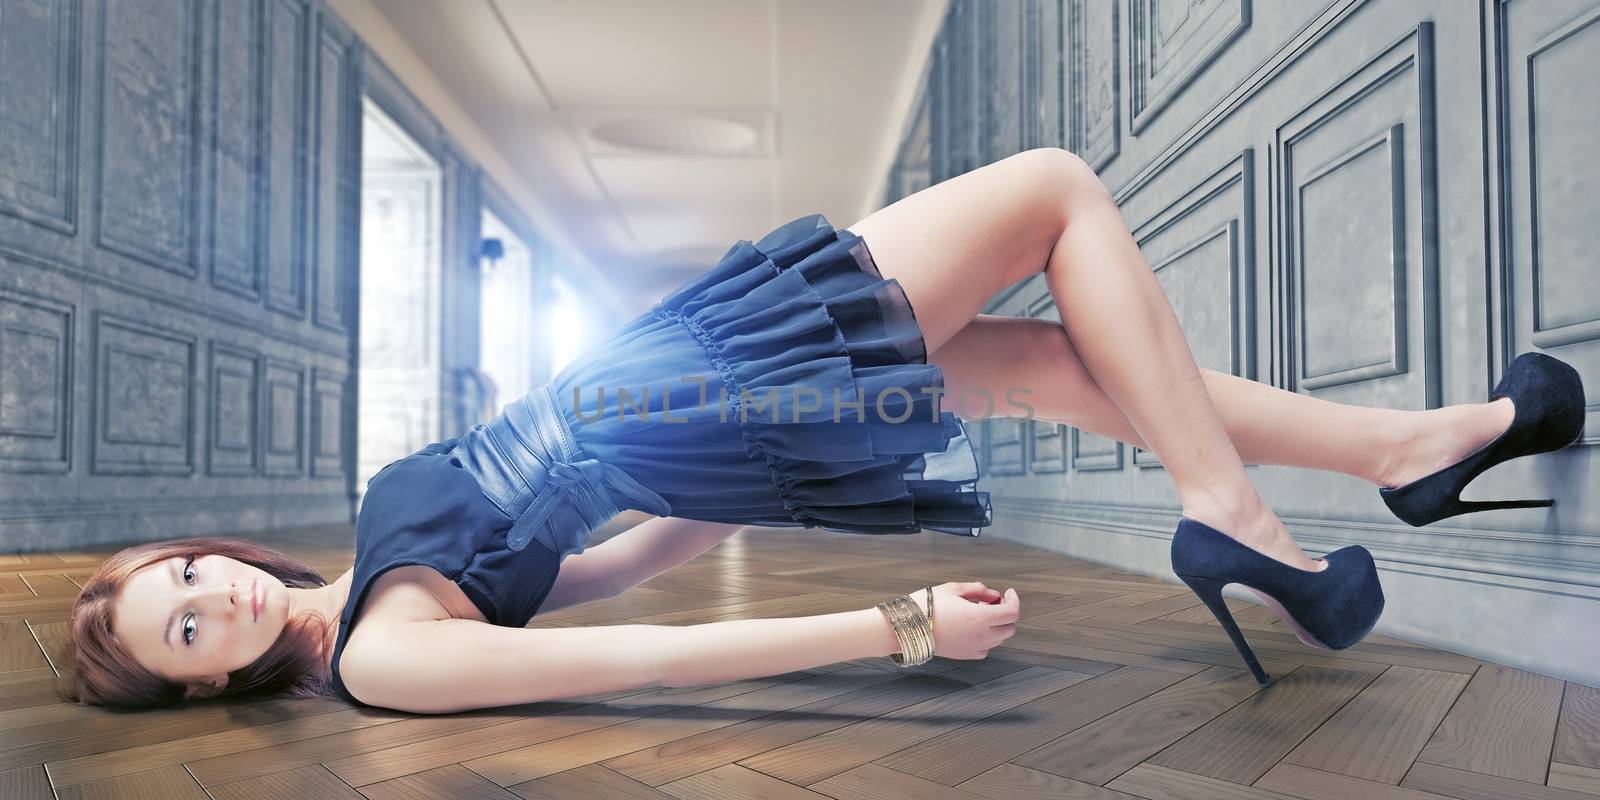 Beauty red-hair  girl lying on the floor in luxury interior. Beautiful depth of field effect